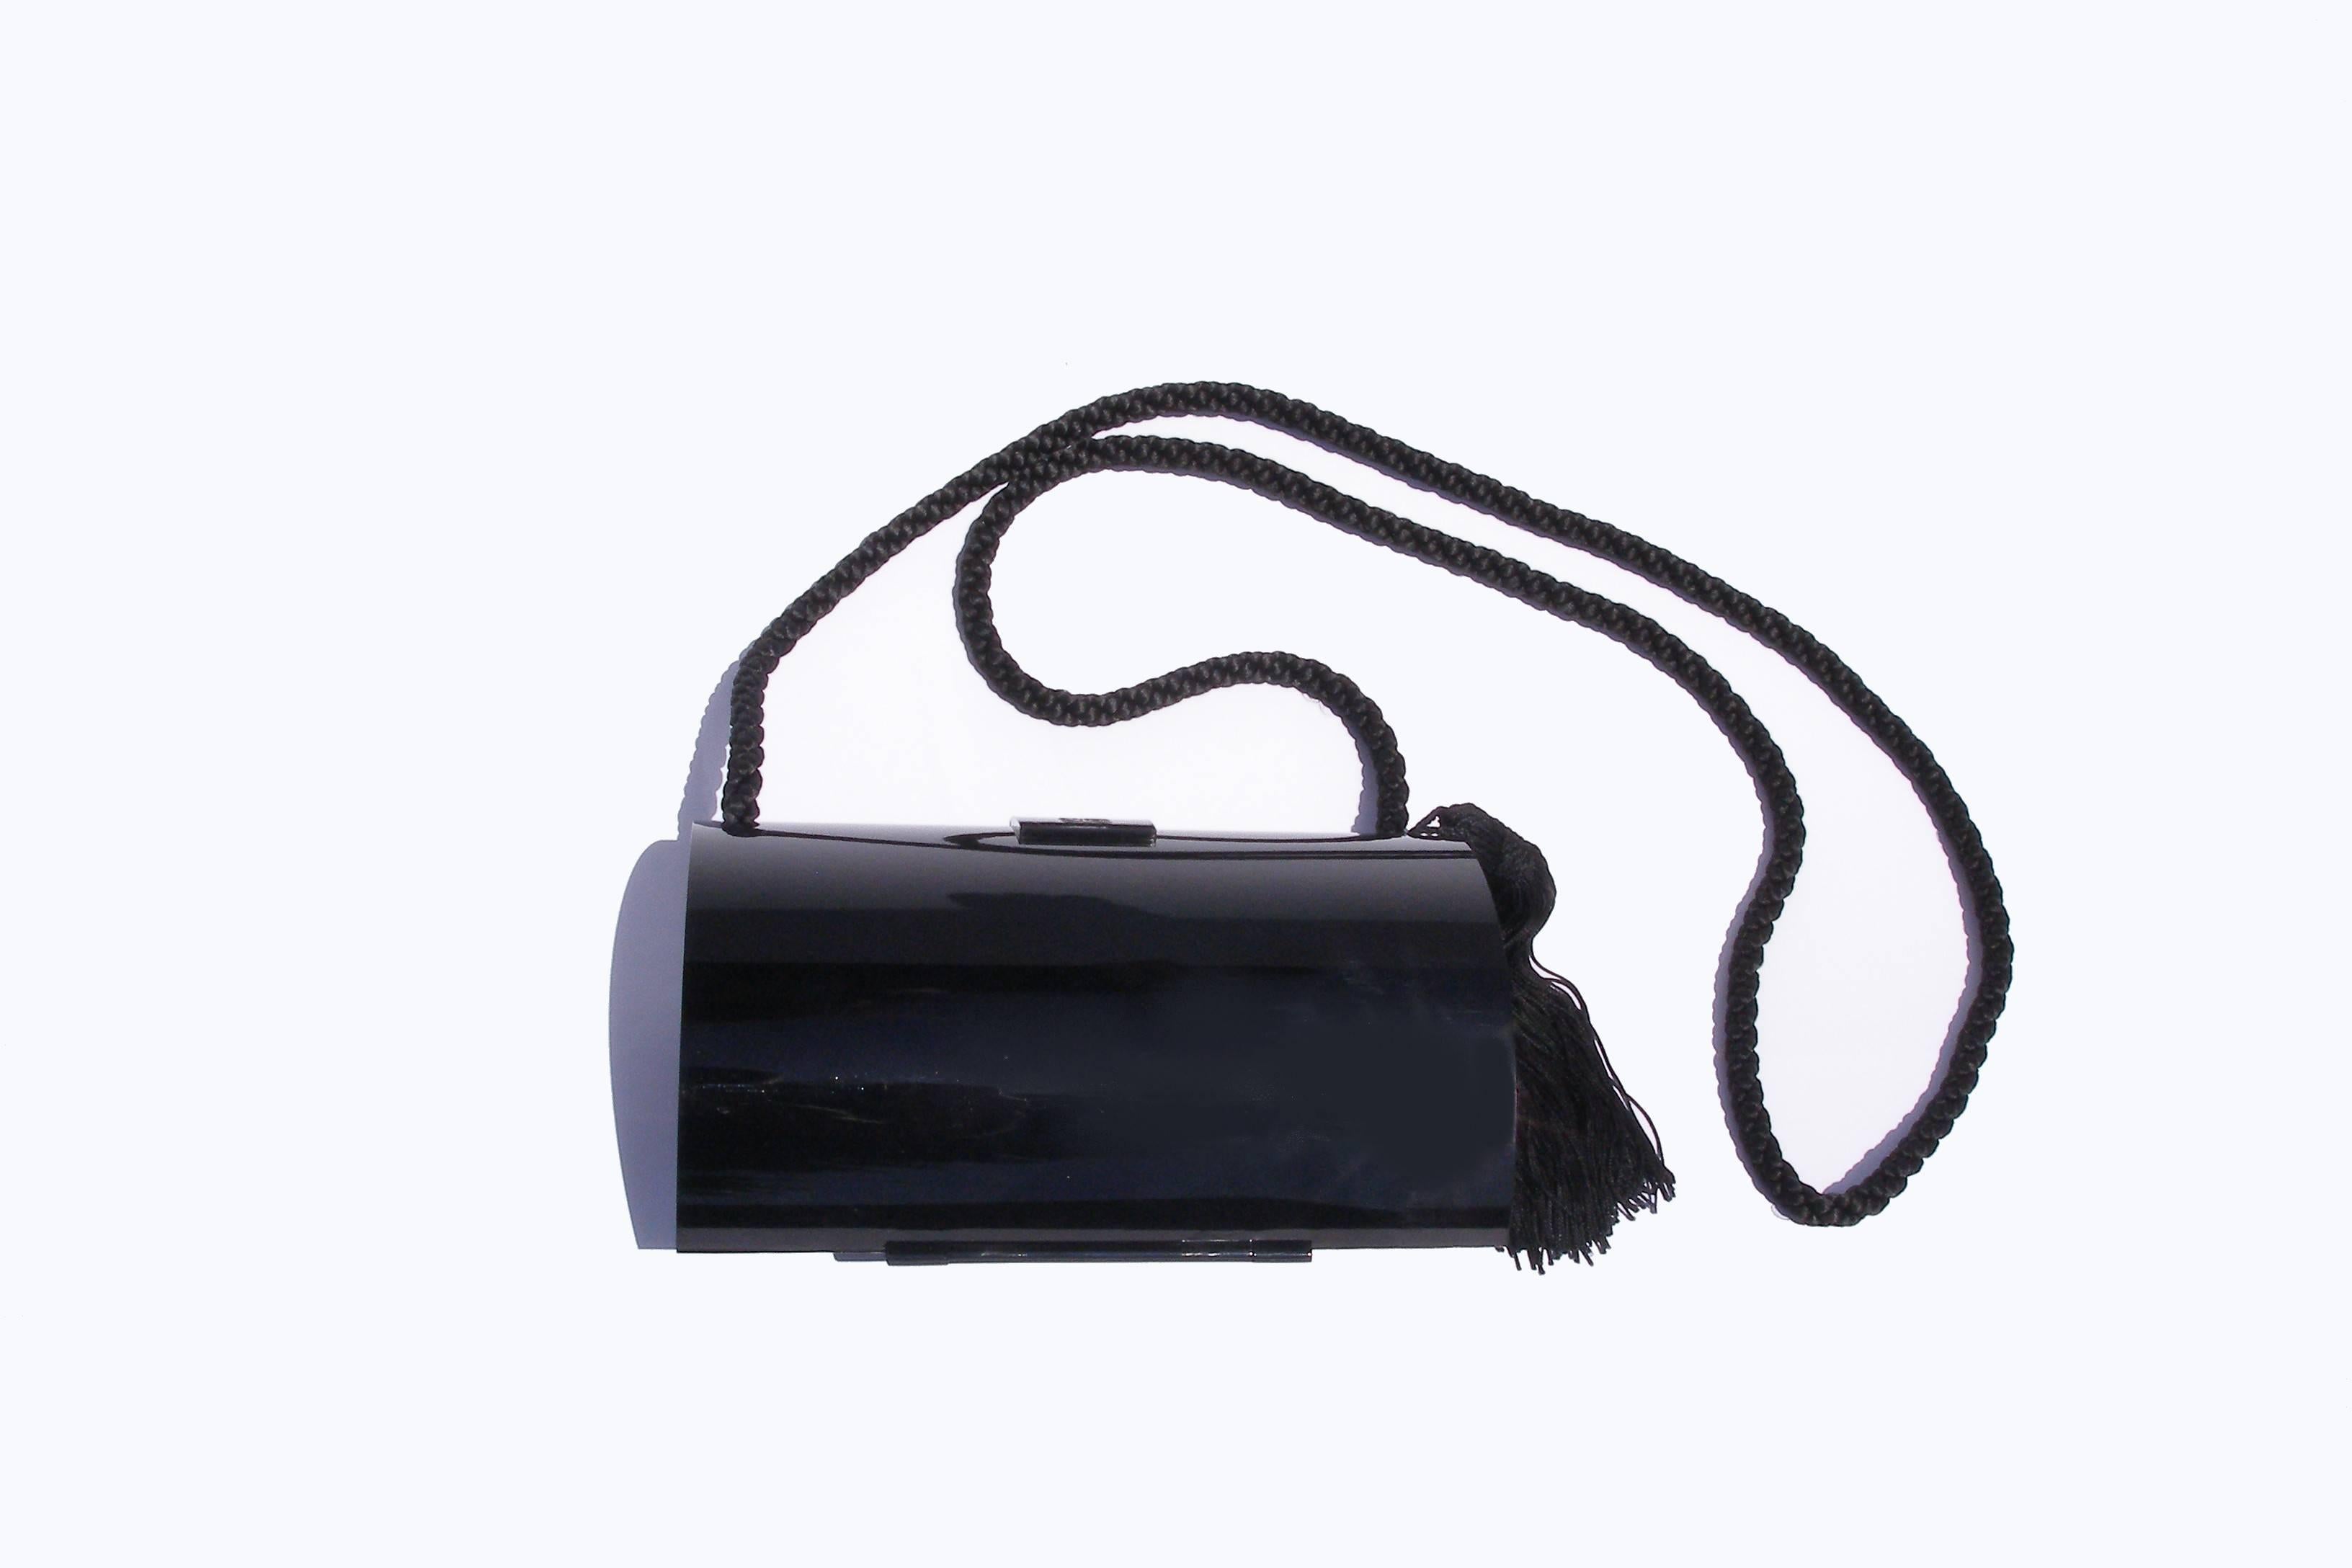 SUBLIME Minaudiére ARPÈGE Vintage Lanvin Made in France
Black Pvc ( bakélite)  and tassel 
Size approx : 20 x 12 x 7 cm 
Long strap approx 130 cm 
it's comes with  Original Lanvin box and dustbag 
Please note : superficial scratches on hard case